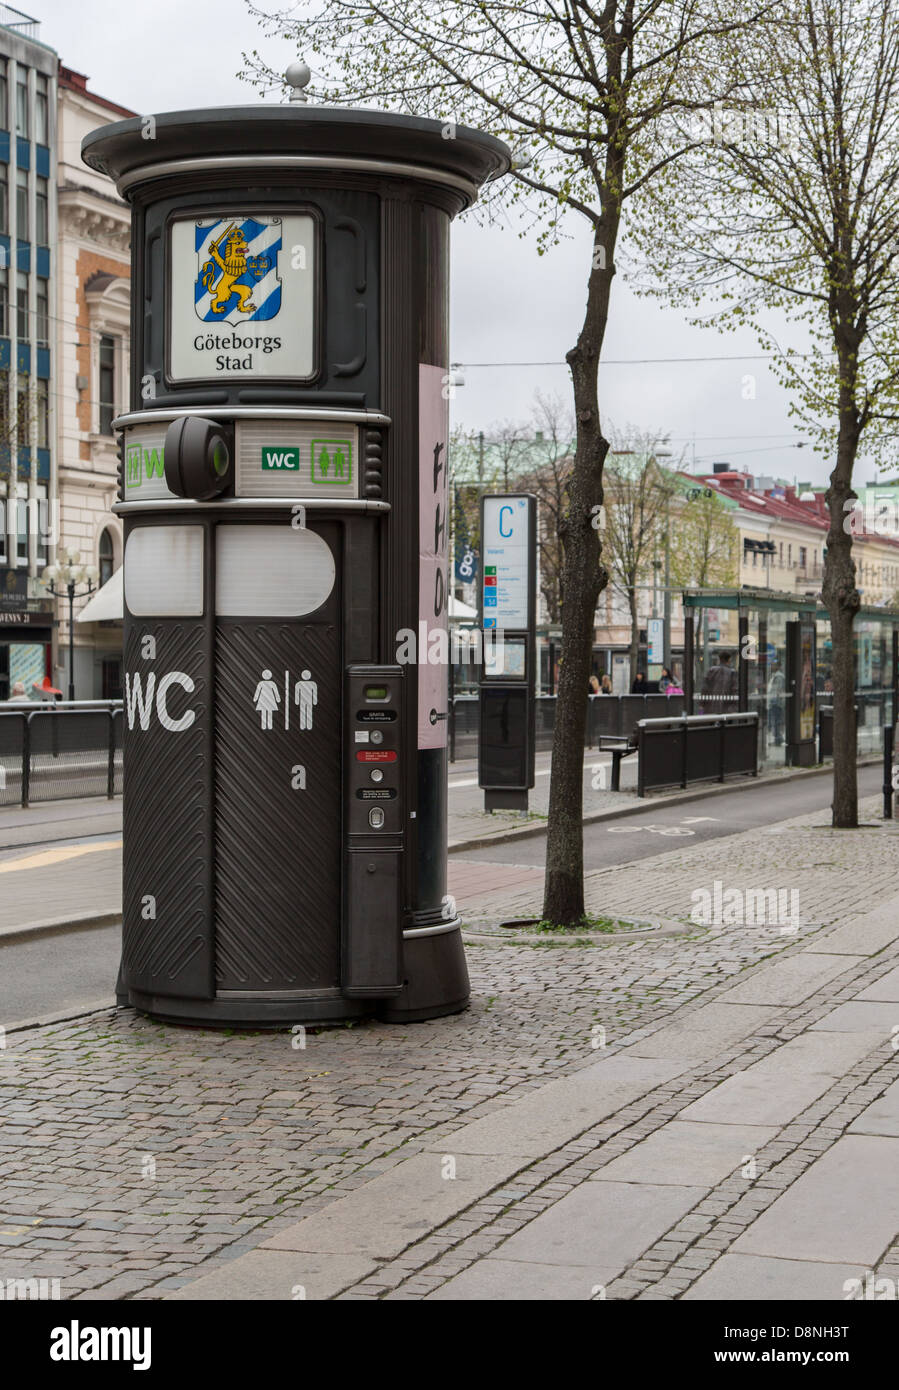 Public pay water closet or toilet on a busy street in Gothenburg, Sweden Stock Photo